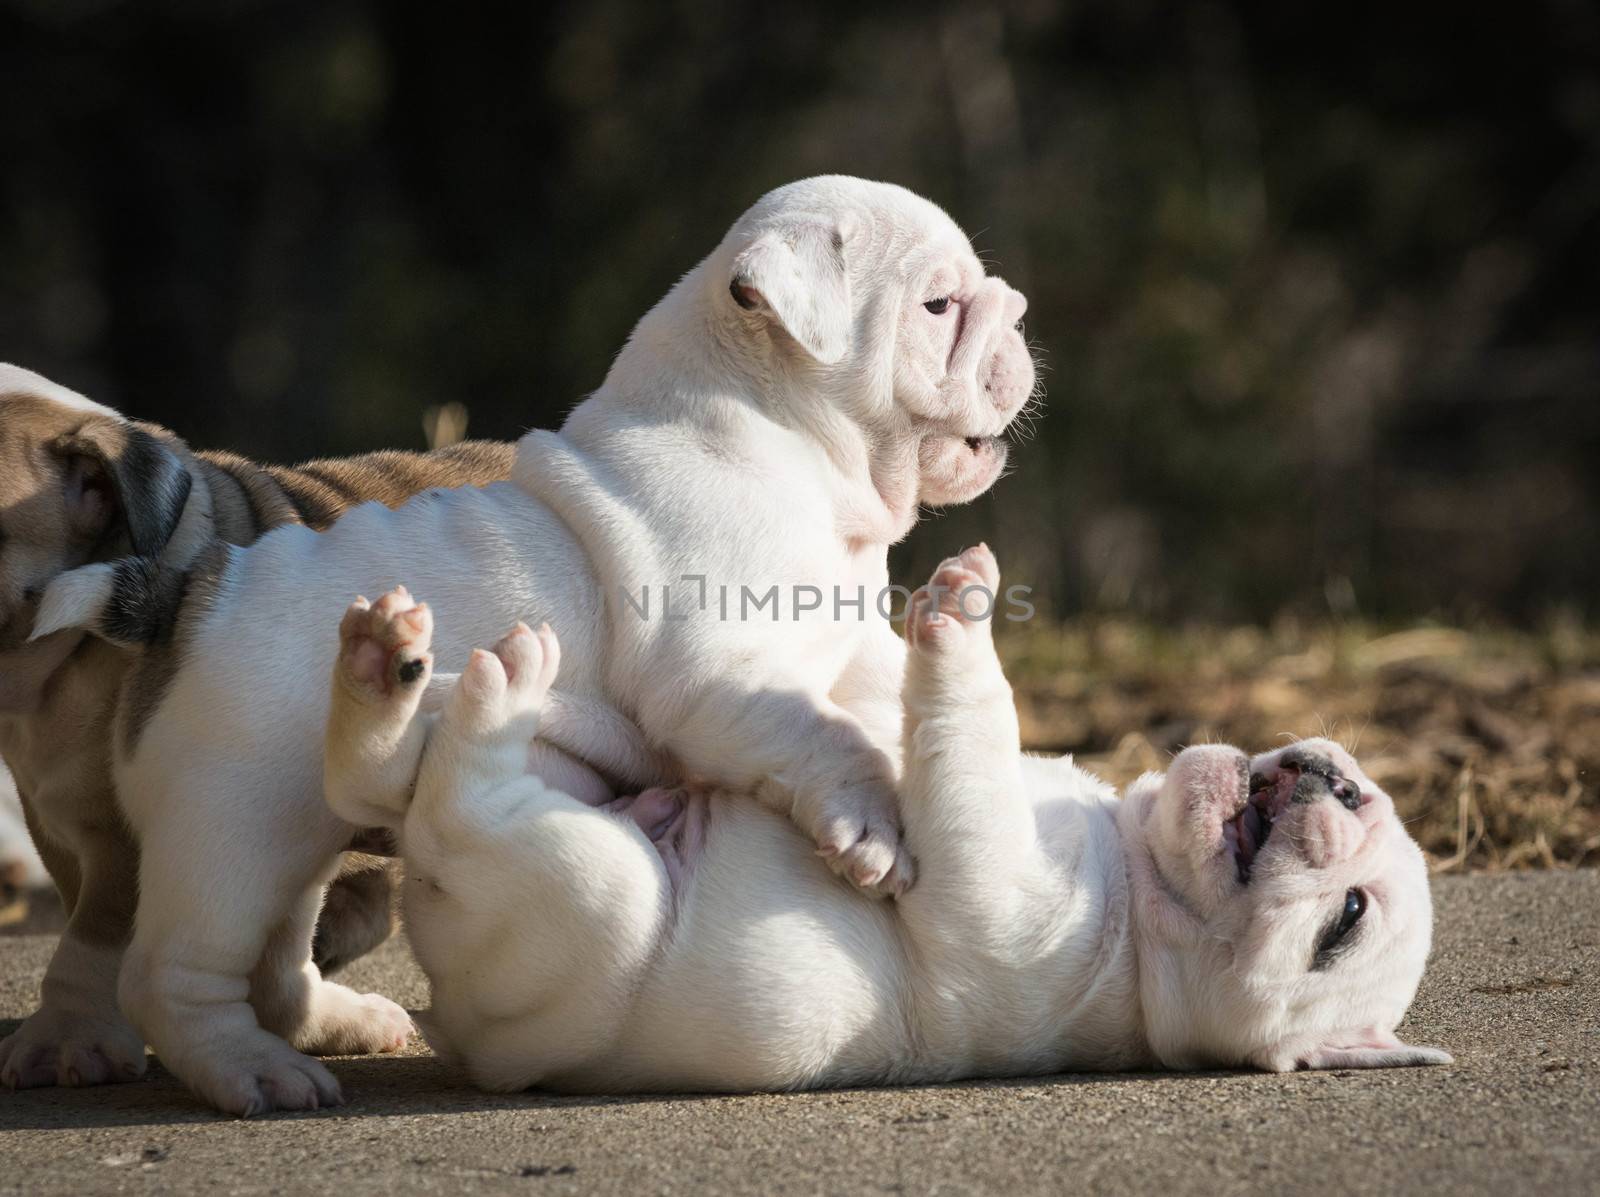 puppies play fighting by willeecole123